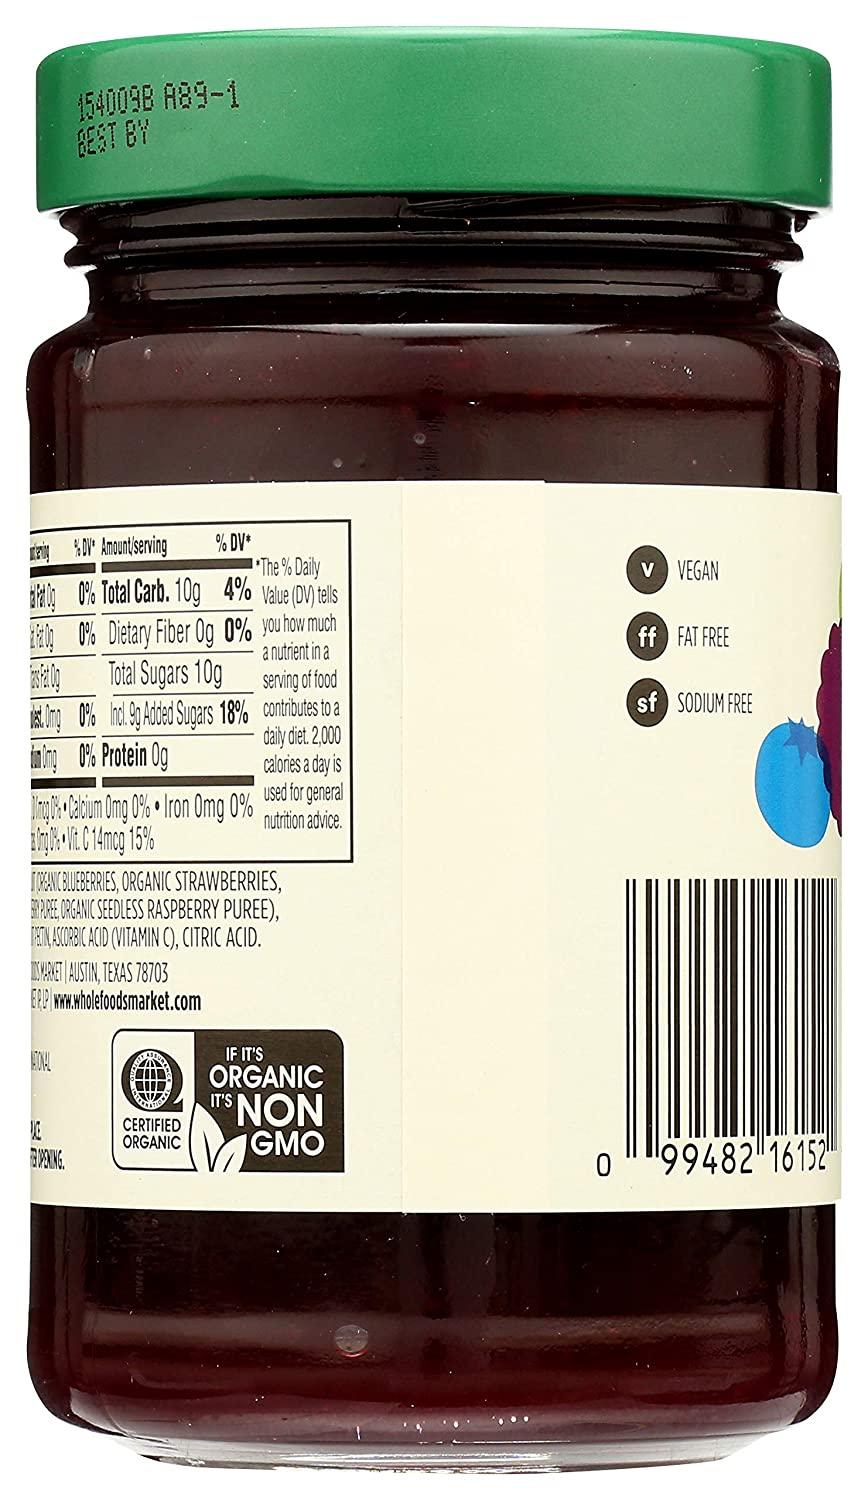 Organic Fruit Spread, Mixed Berry, 17 oz at Whole Foods Market